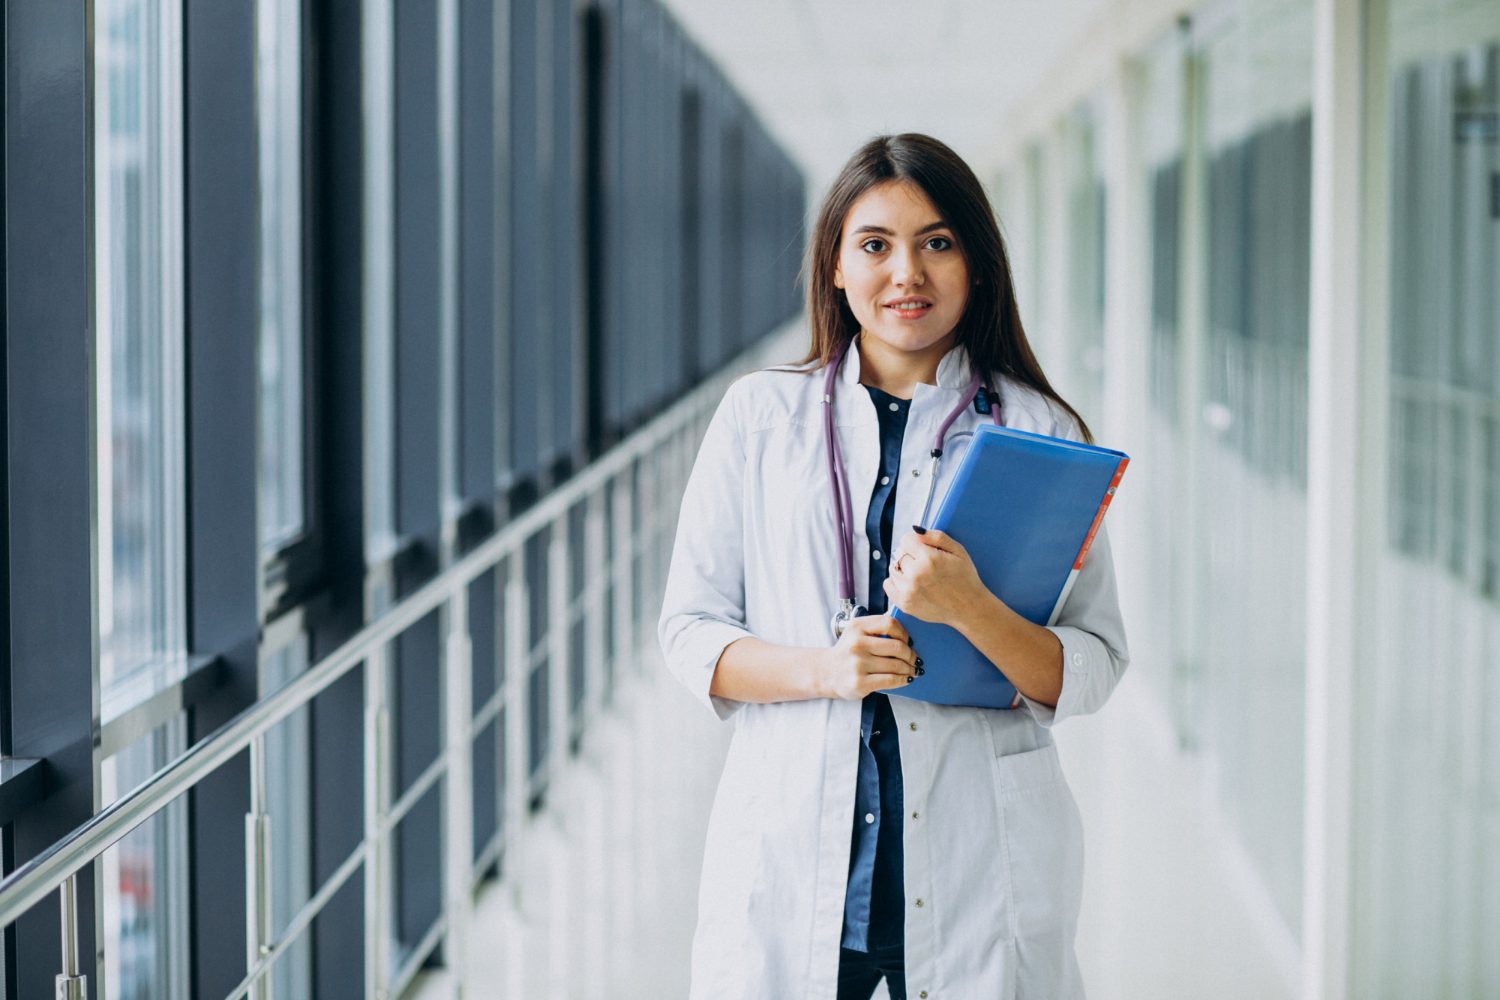 attractive-female-doctor-standing-with-documents-hospital